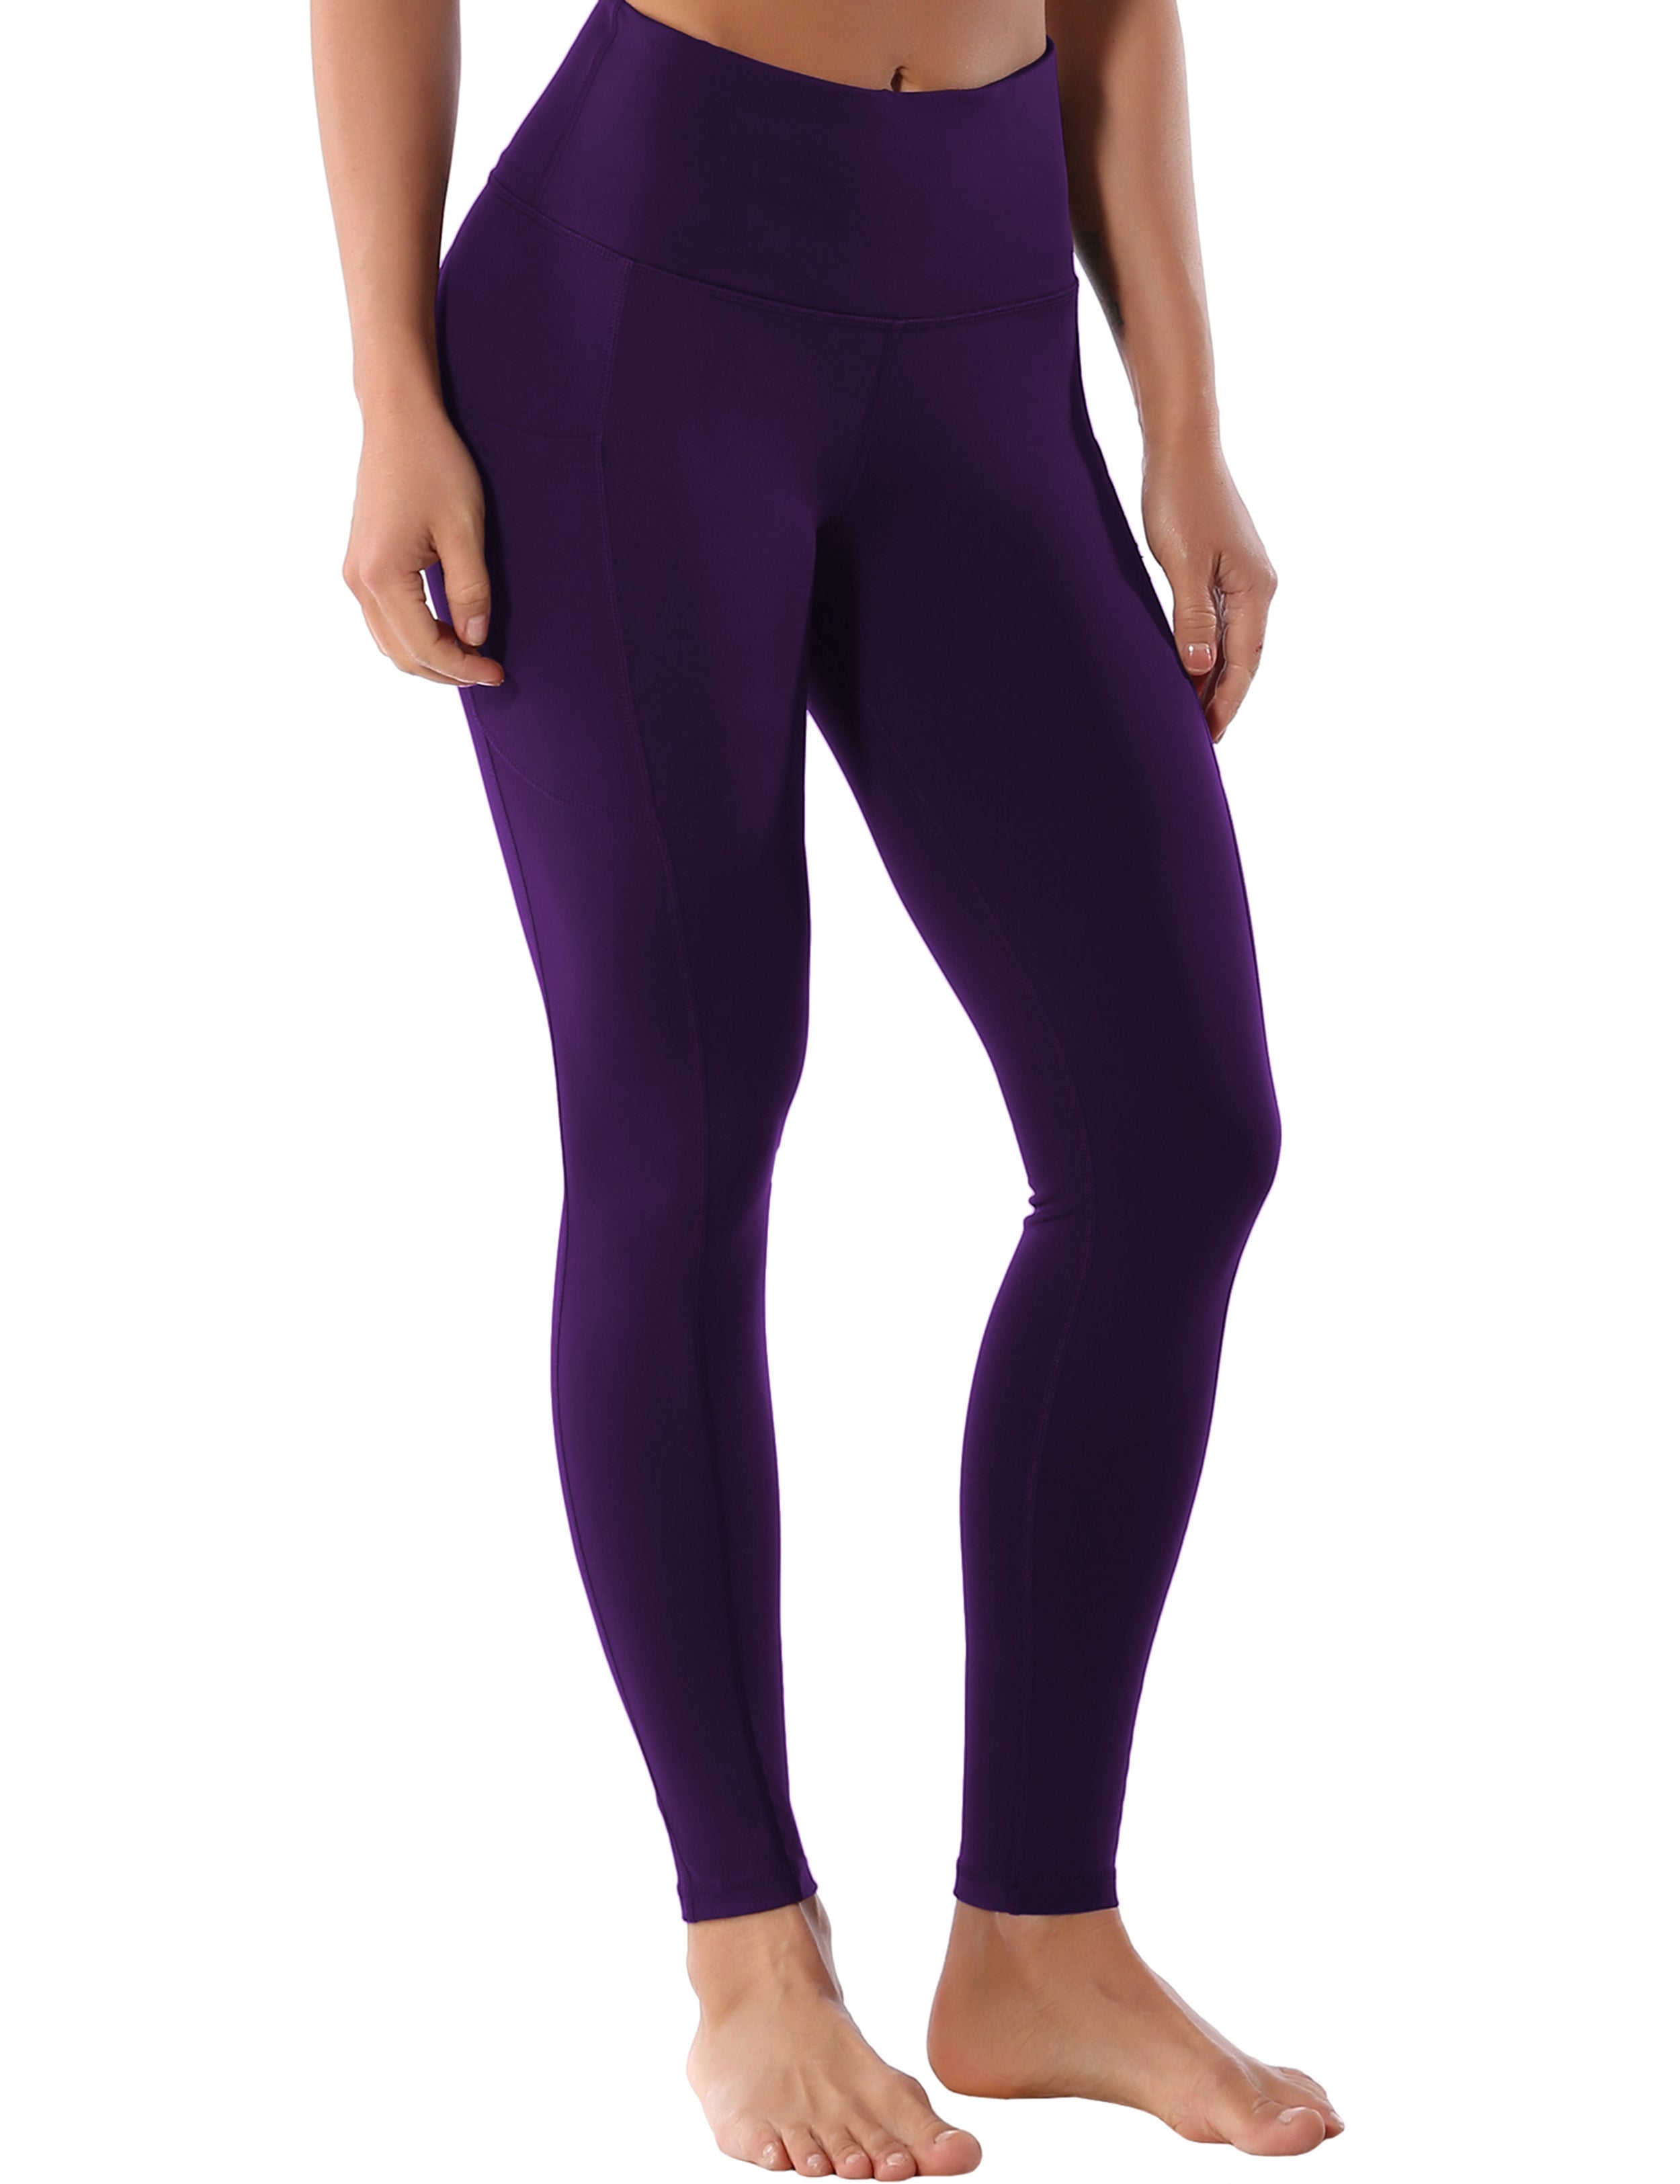 Hip Line Side Pockets Yoga Pants eggplantpurple Sexy Hip Line Side Pockets 75%Nylon/25%Spandex Fabric doesn't attract lint easily 4-way stretch No see-through Moisture-wicking Tummy control Inner pocket Two lengths